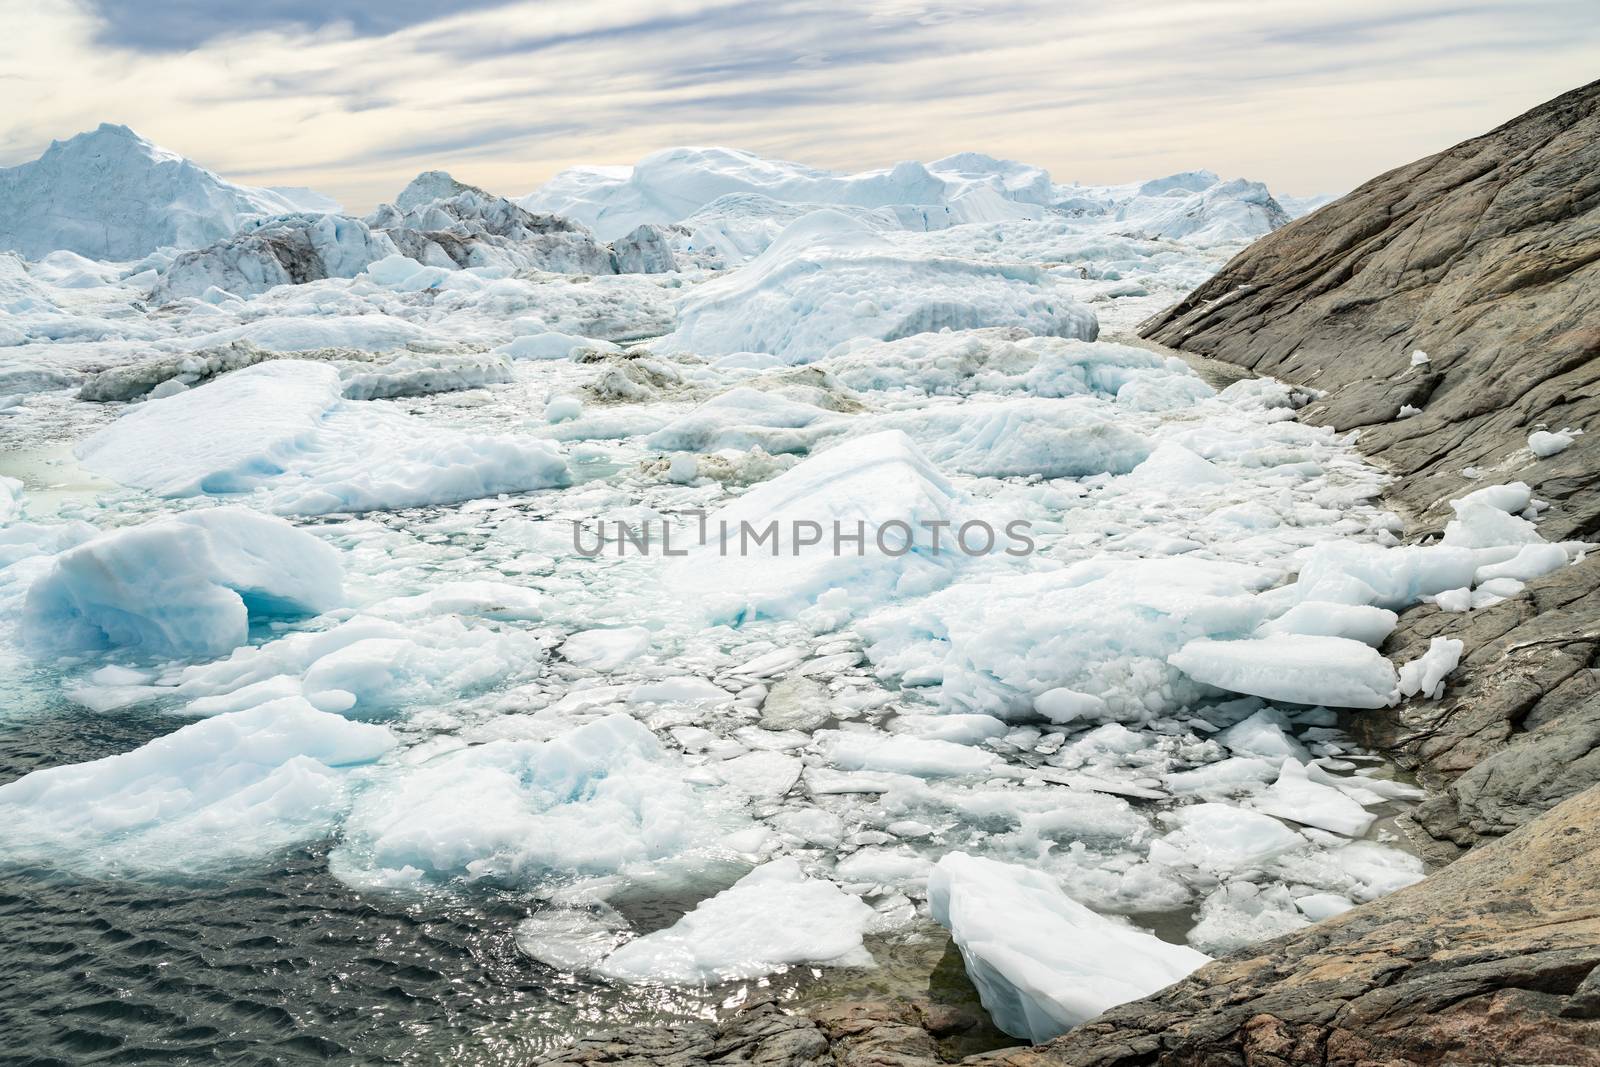 Global warming - Greenland Iceberg landscape of Ilulissat icefjord with giant icebergs. Icebergs from melting glacier. Arctic nature heavily affected by climate change by Maridav